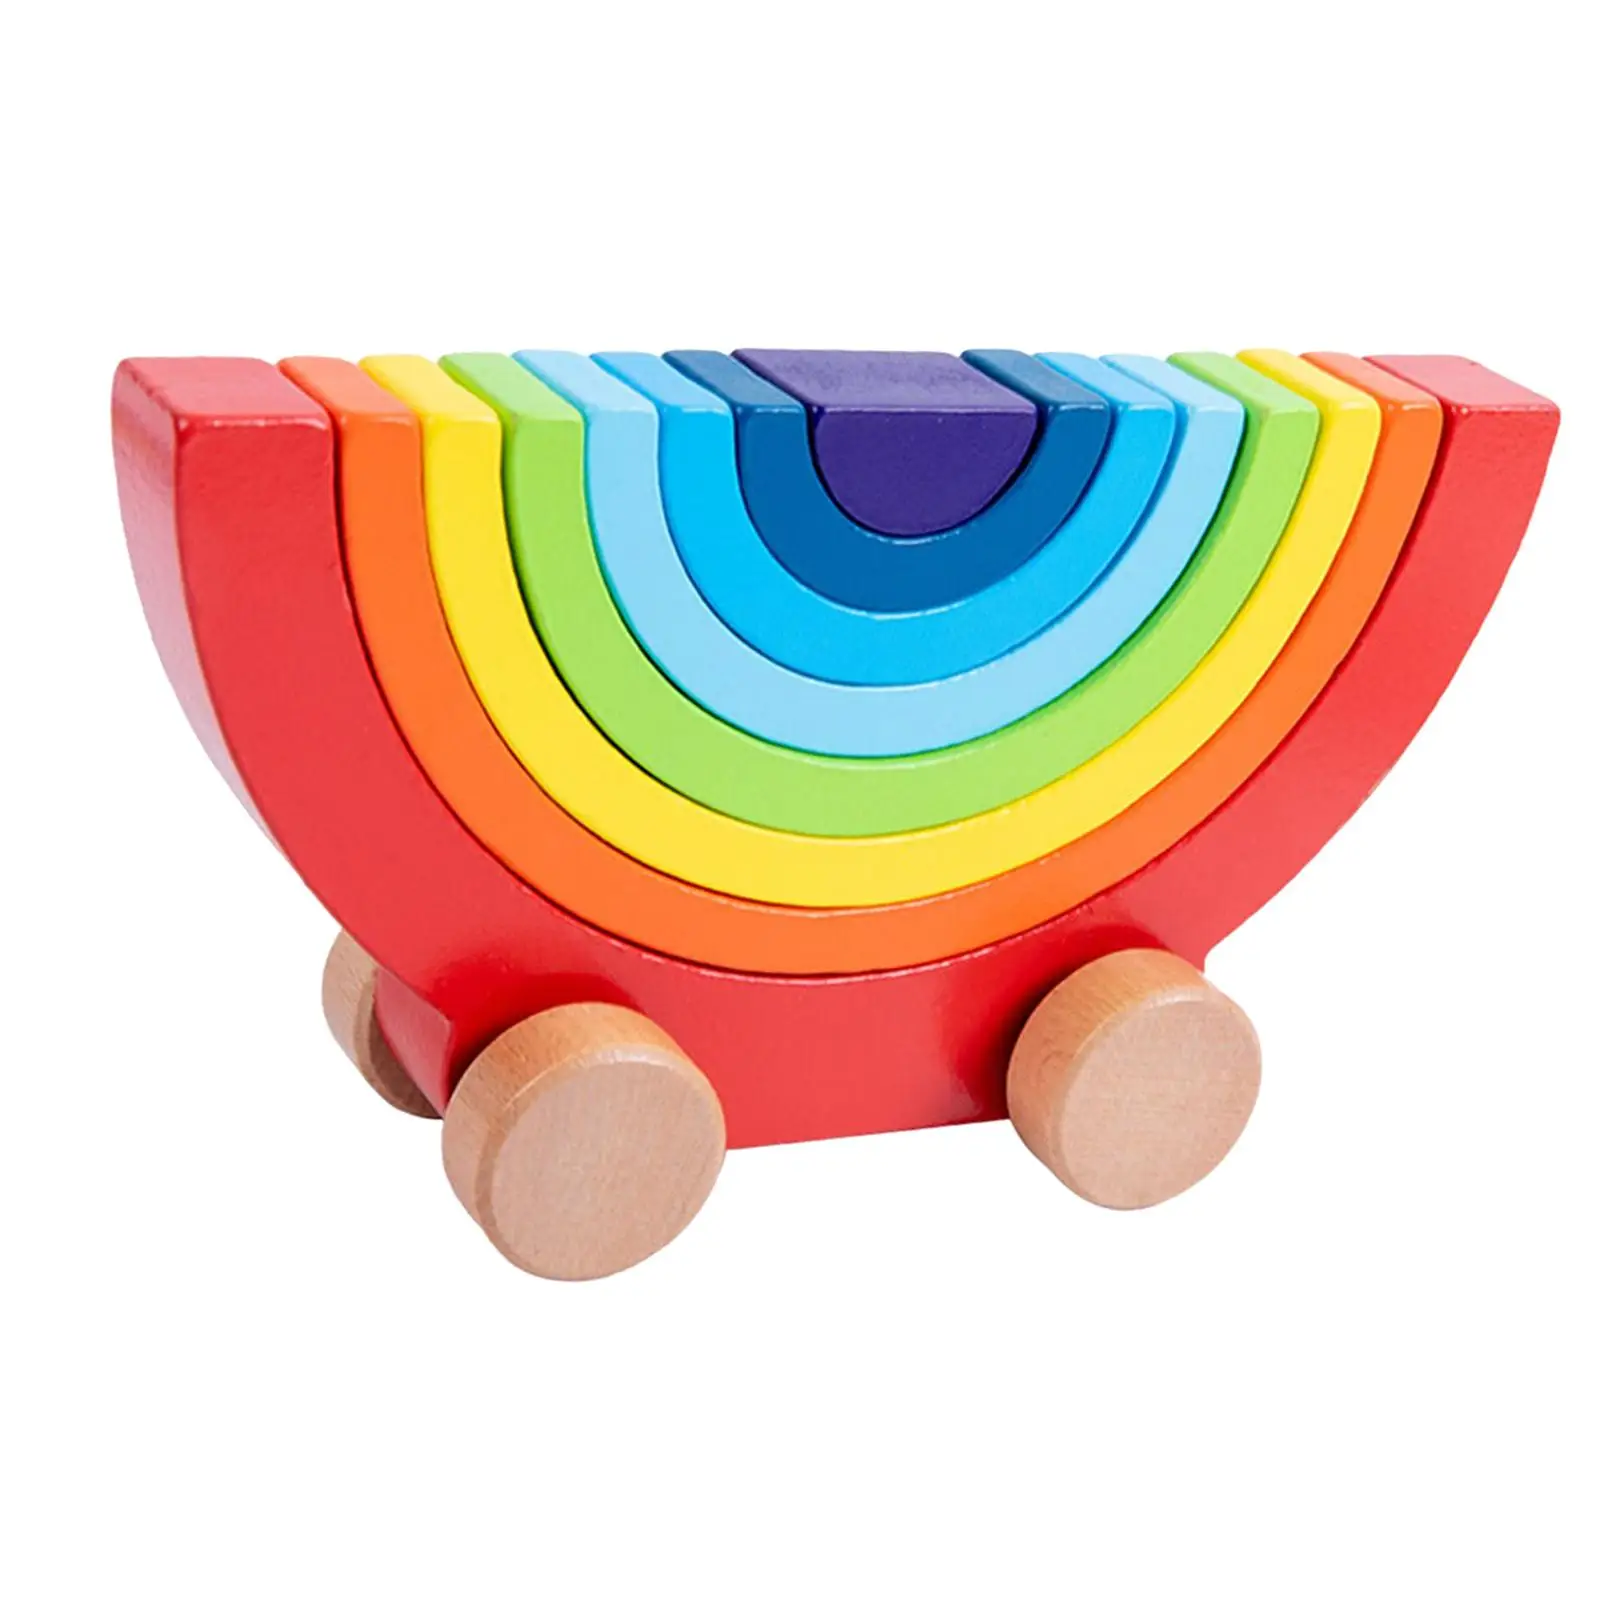 Wooden Building Blocks Car Toy Stackable Early Educational Creative Arch for